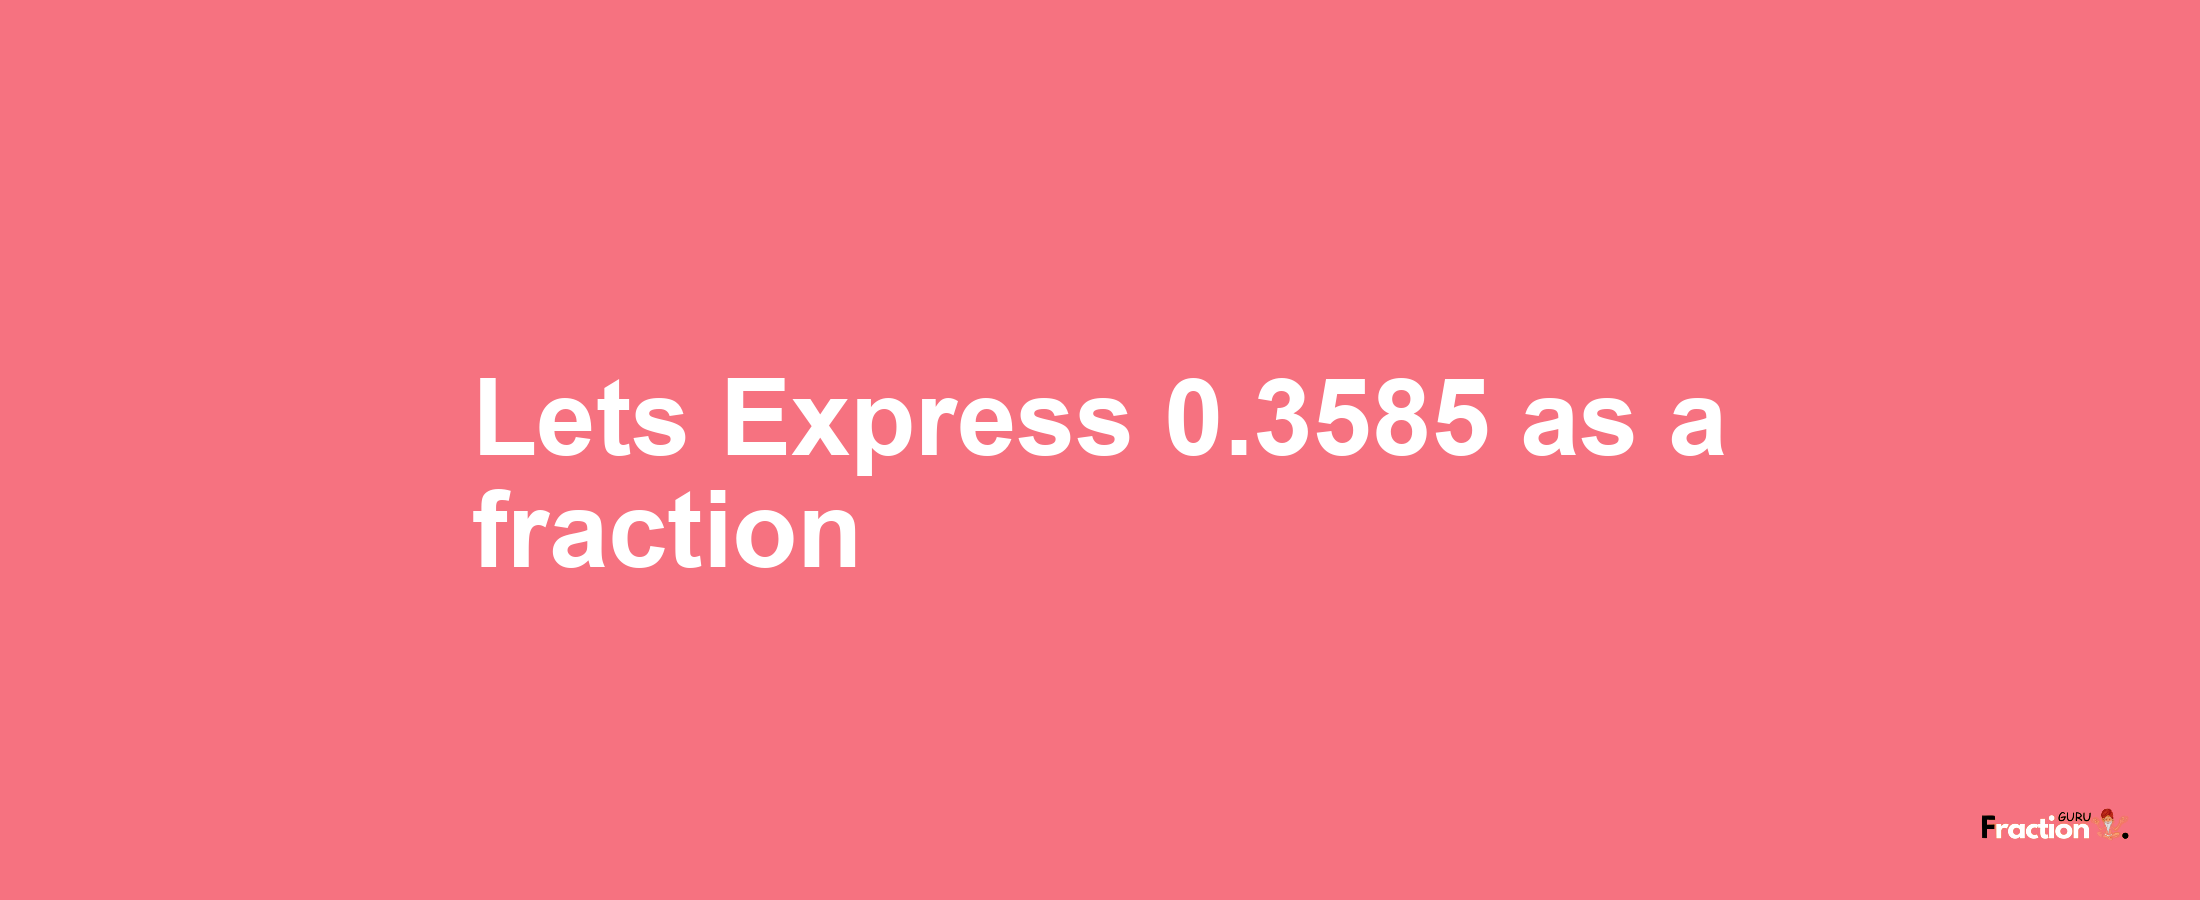 Lets Express 0.3585 as afraction